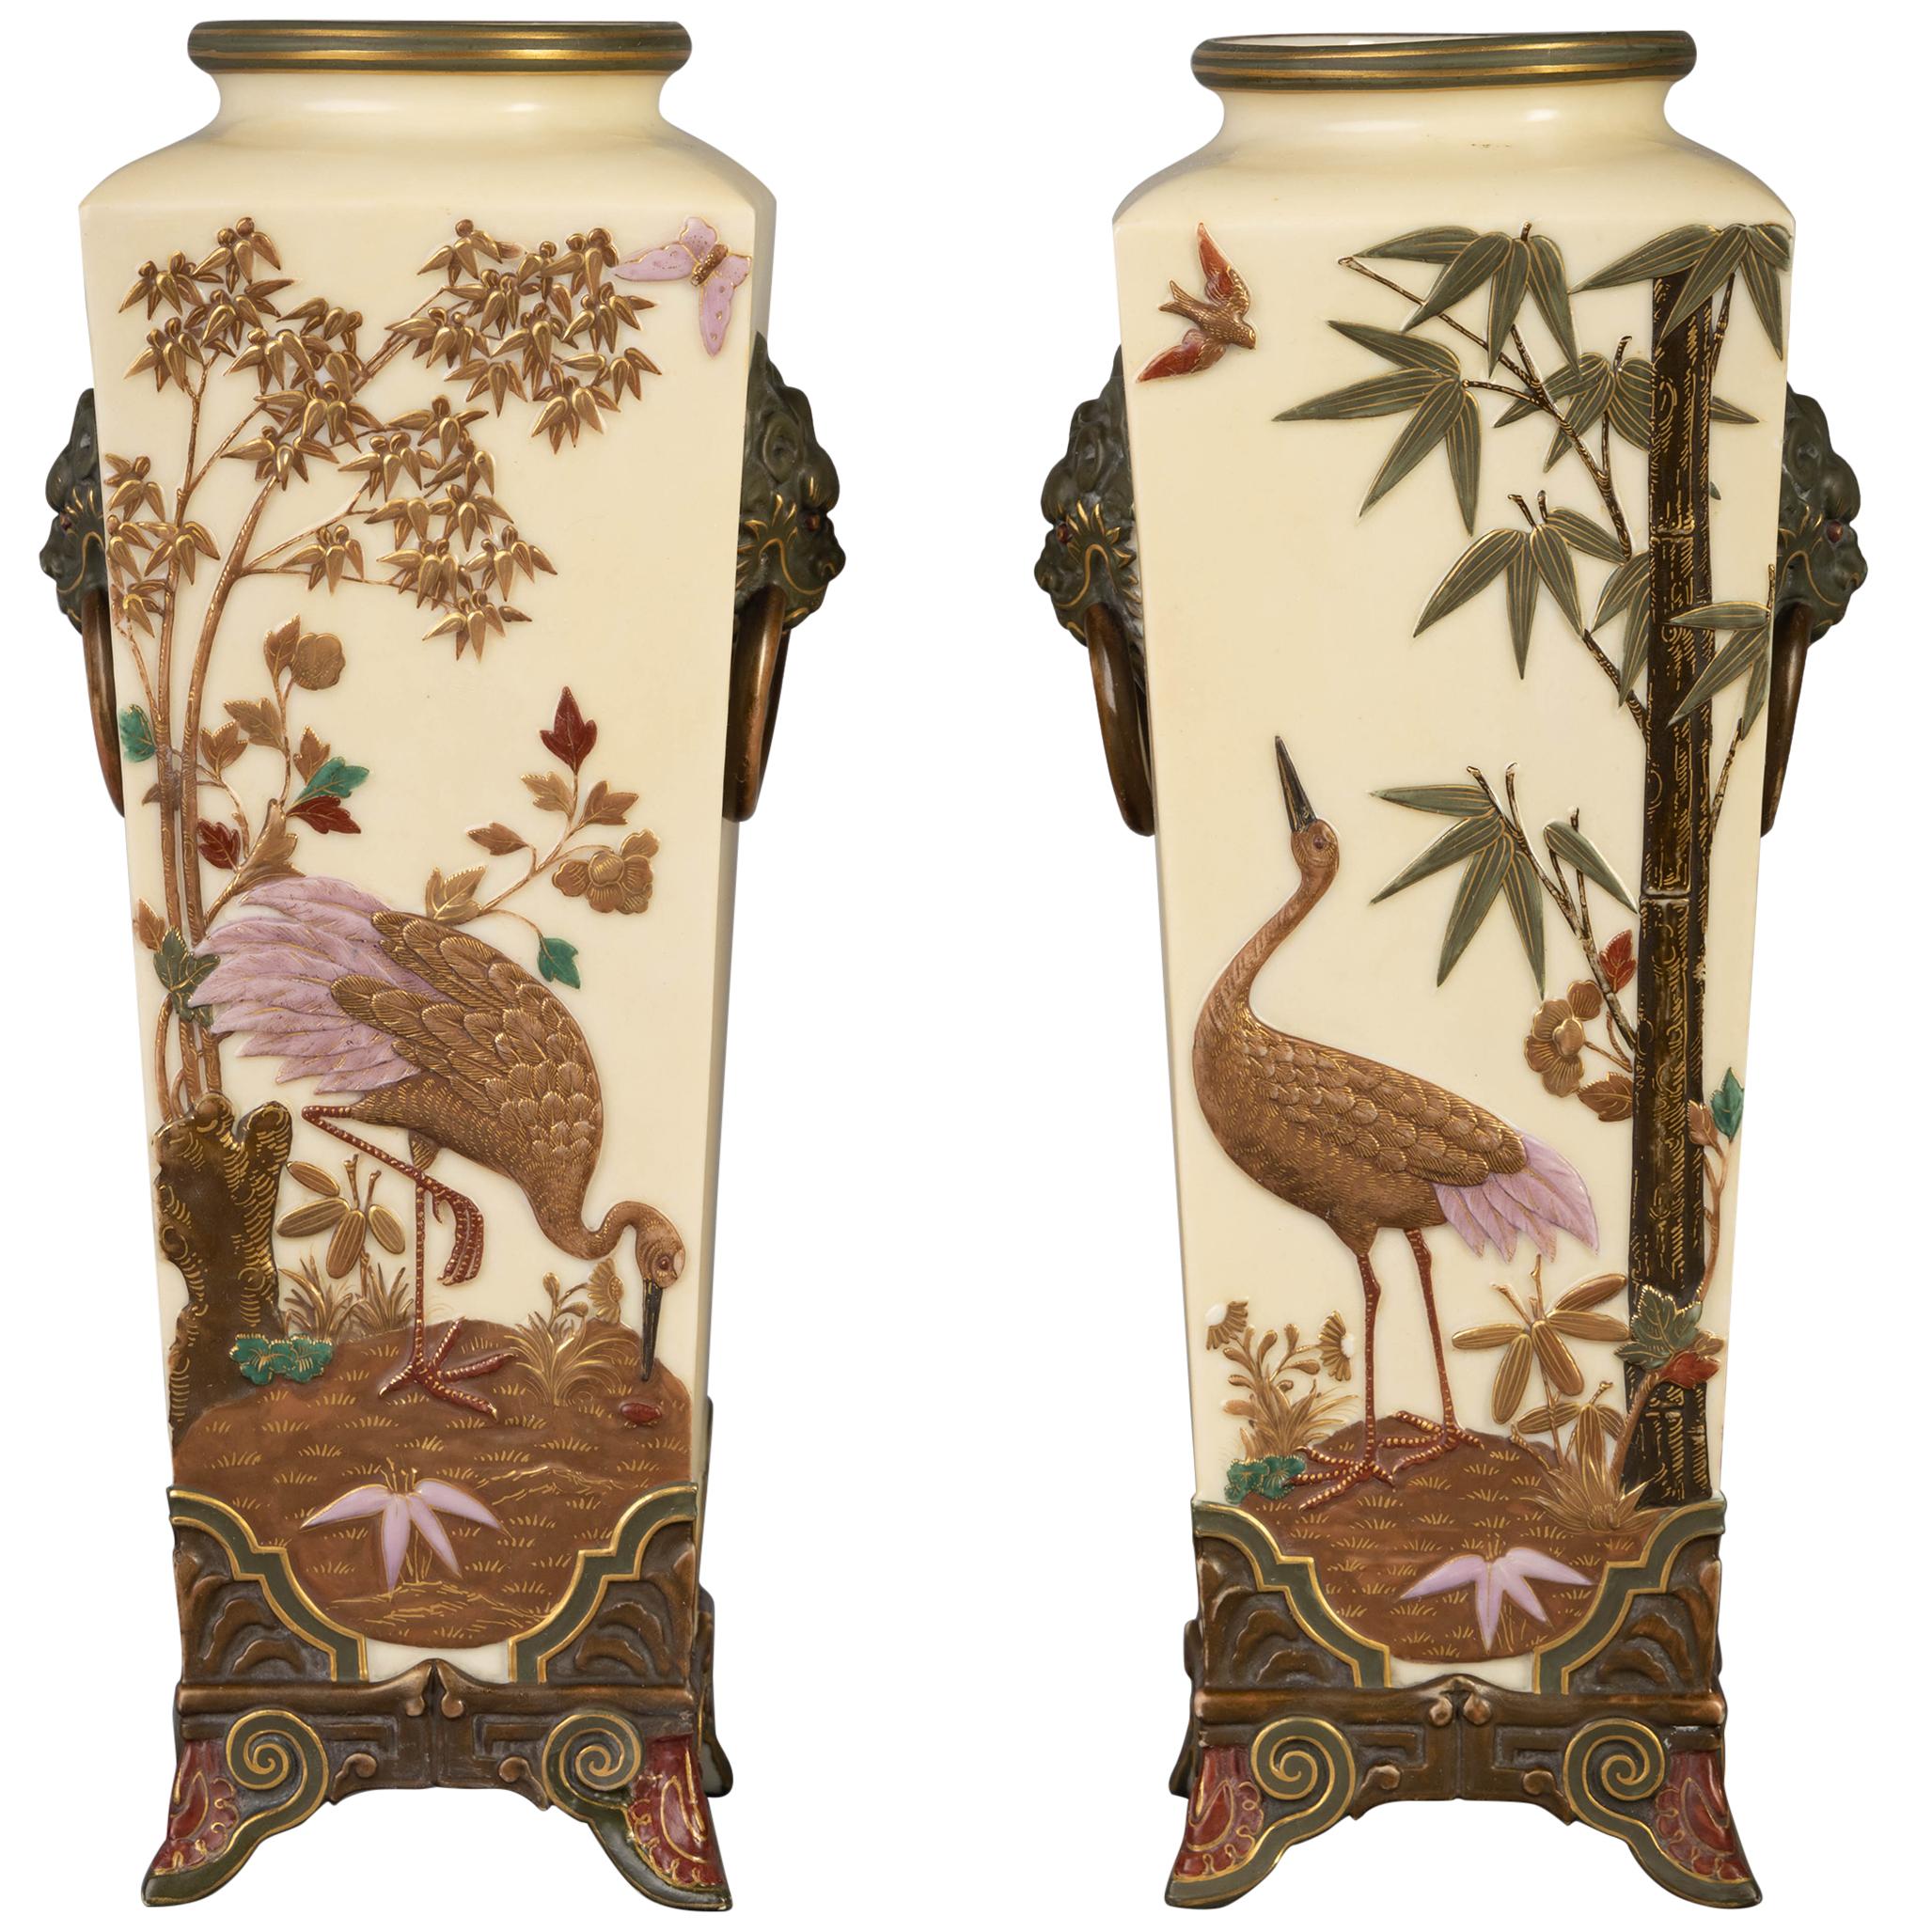 Pair of English Porcelain Aesthetic Movement Vases, Royal Worcester, circa 1880 For Sale